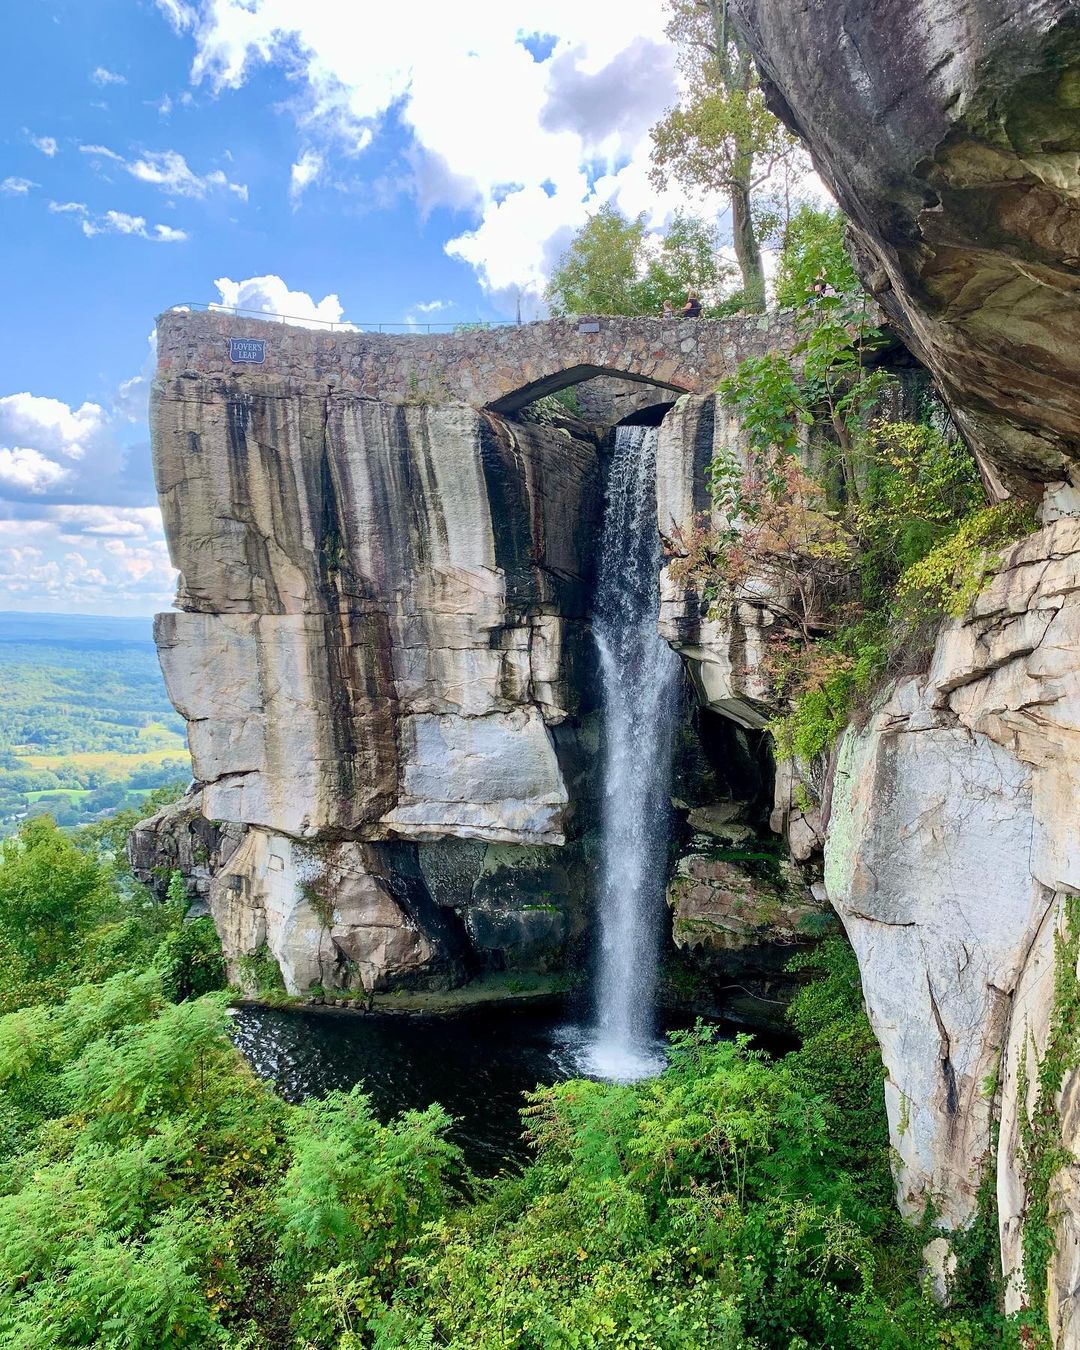 A waterfall runs through Lookout Mountain. Photo by Instagram user @thebookofplaces.